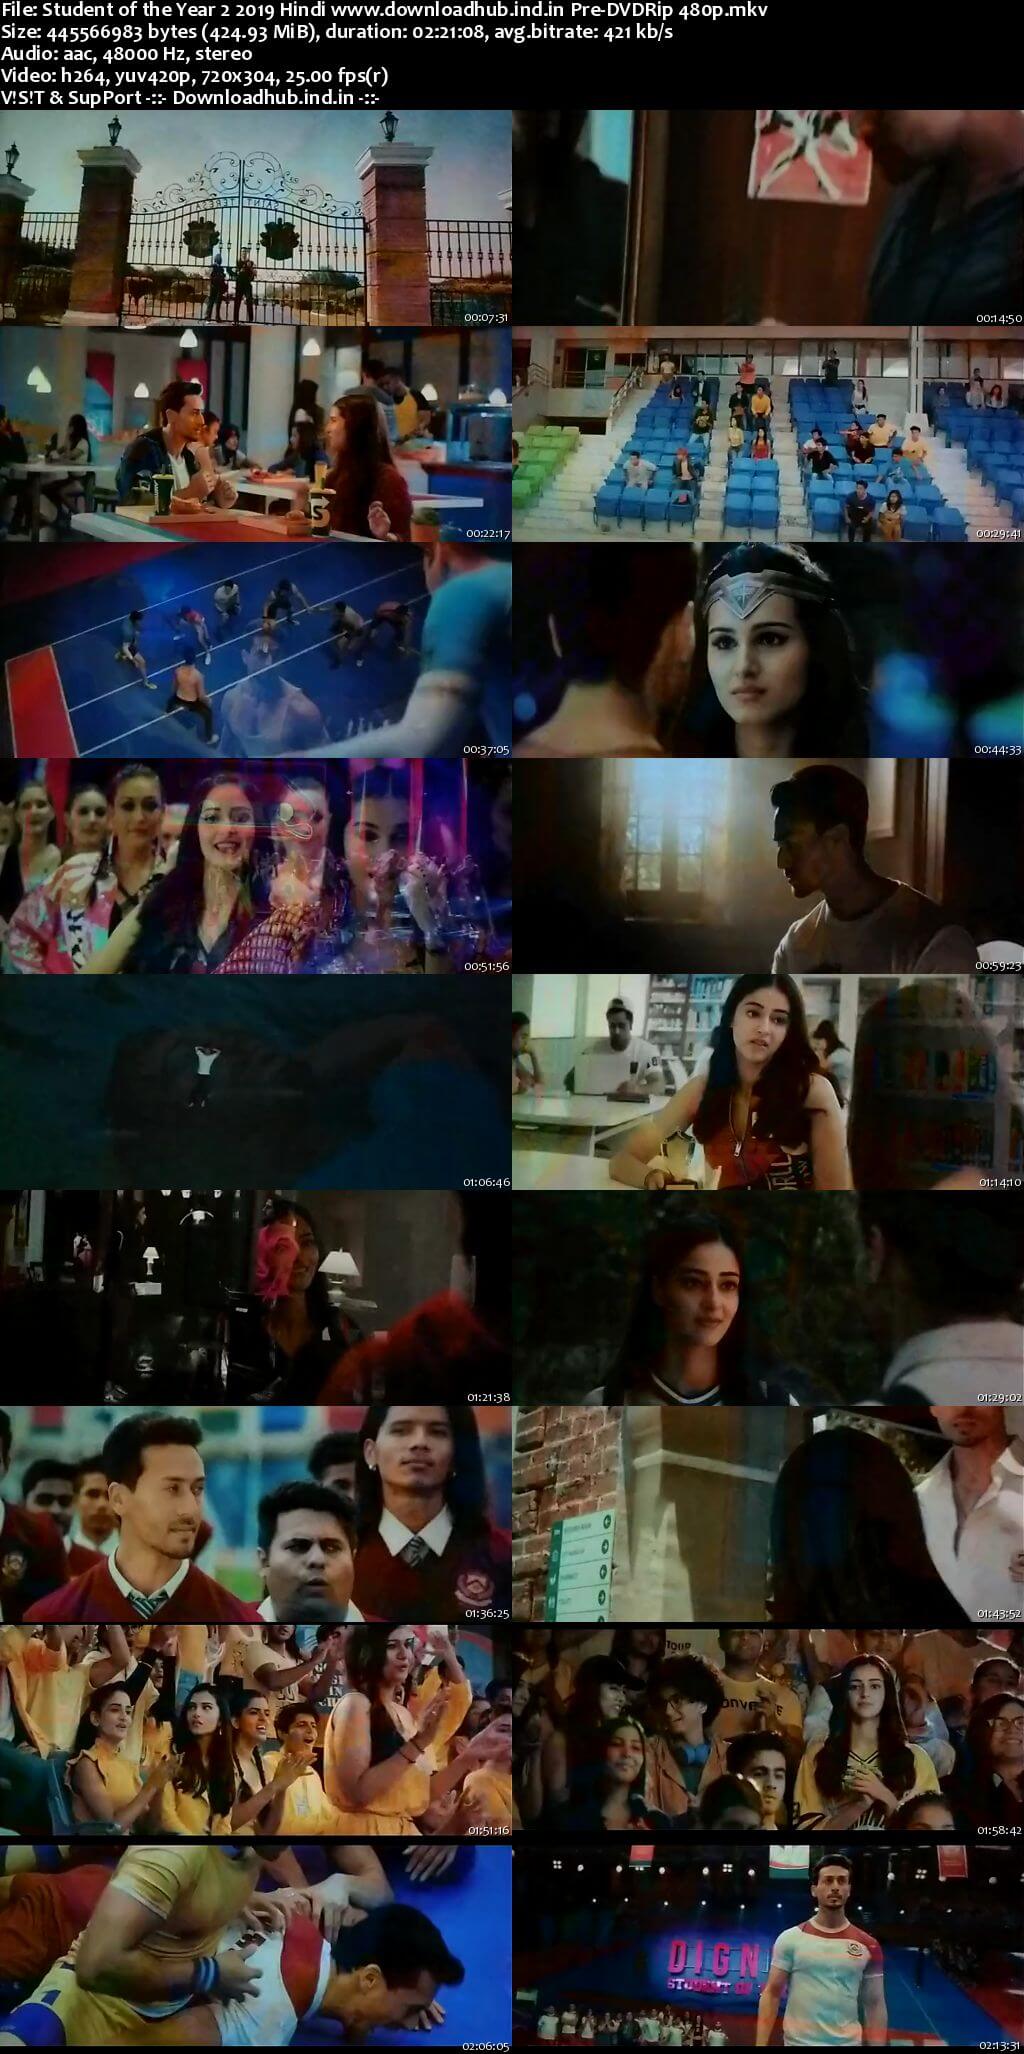 Student of the Year 2 2019 Hindi 400MB Pre-DVDRip 480p